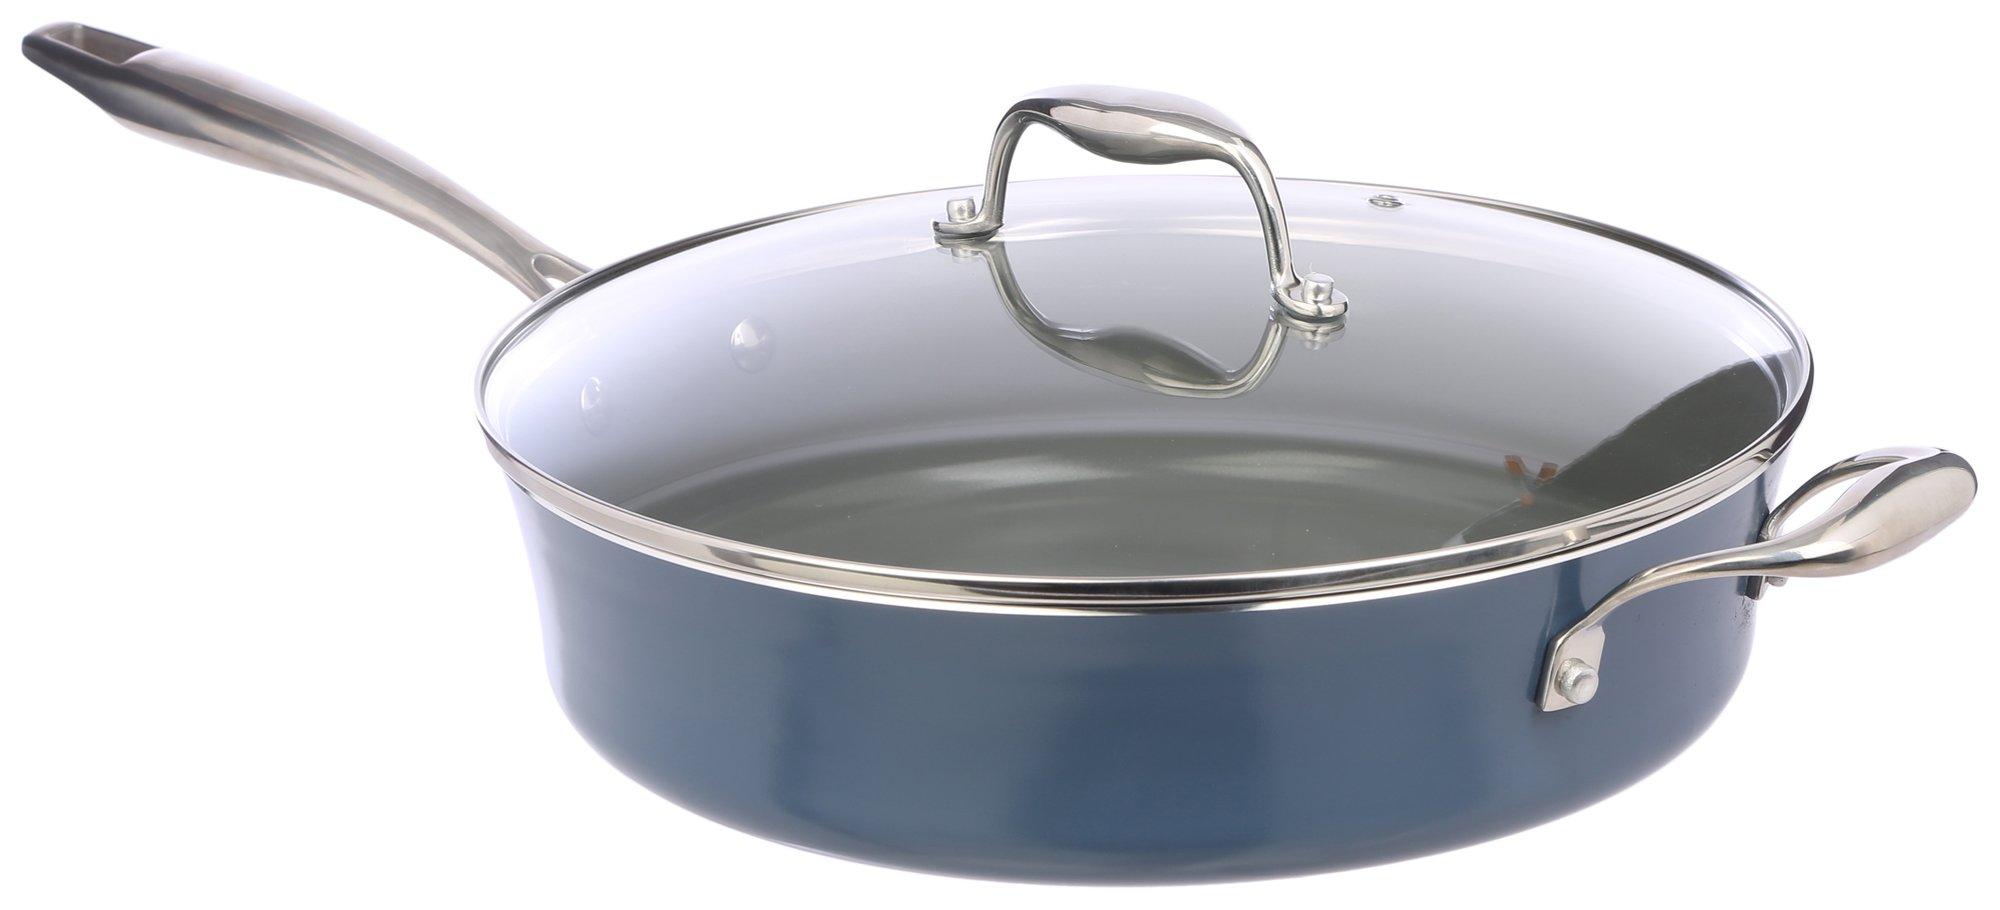 Zest Kitchen and Home Everyday Pan With Lid